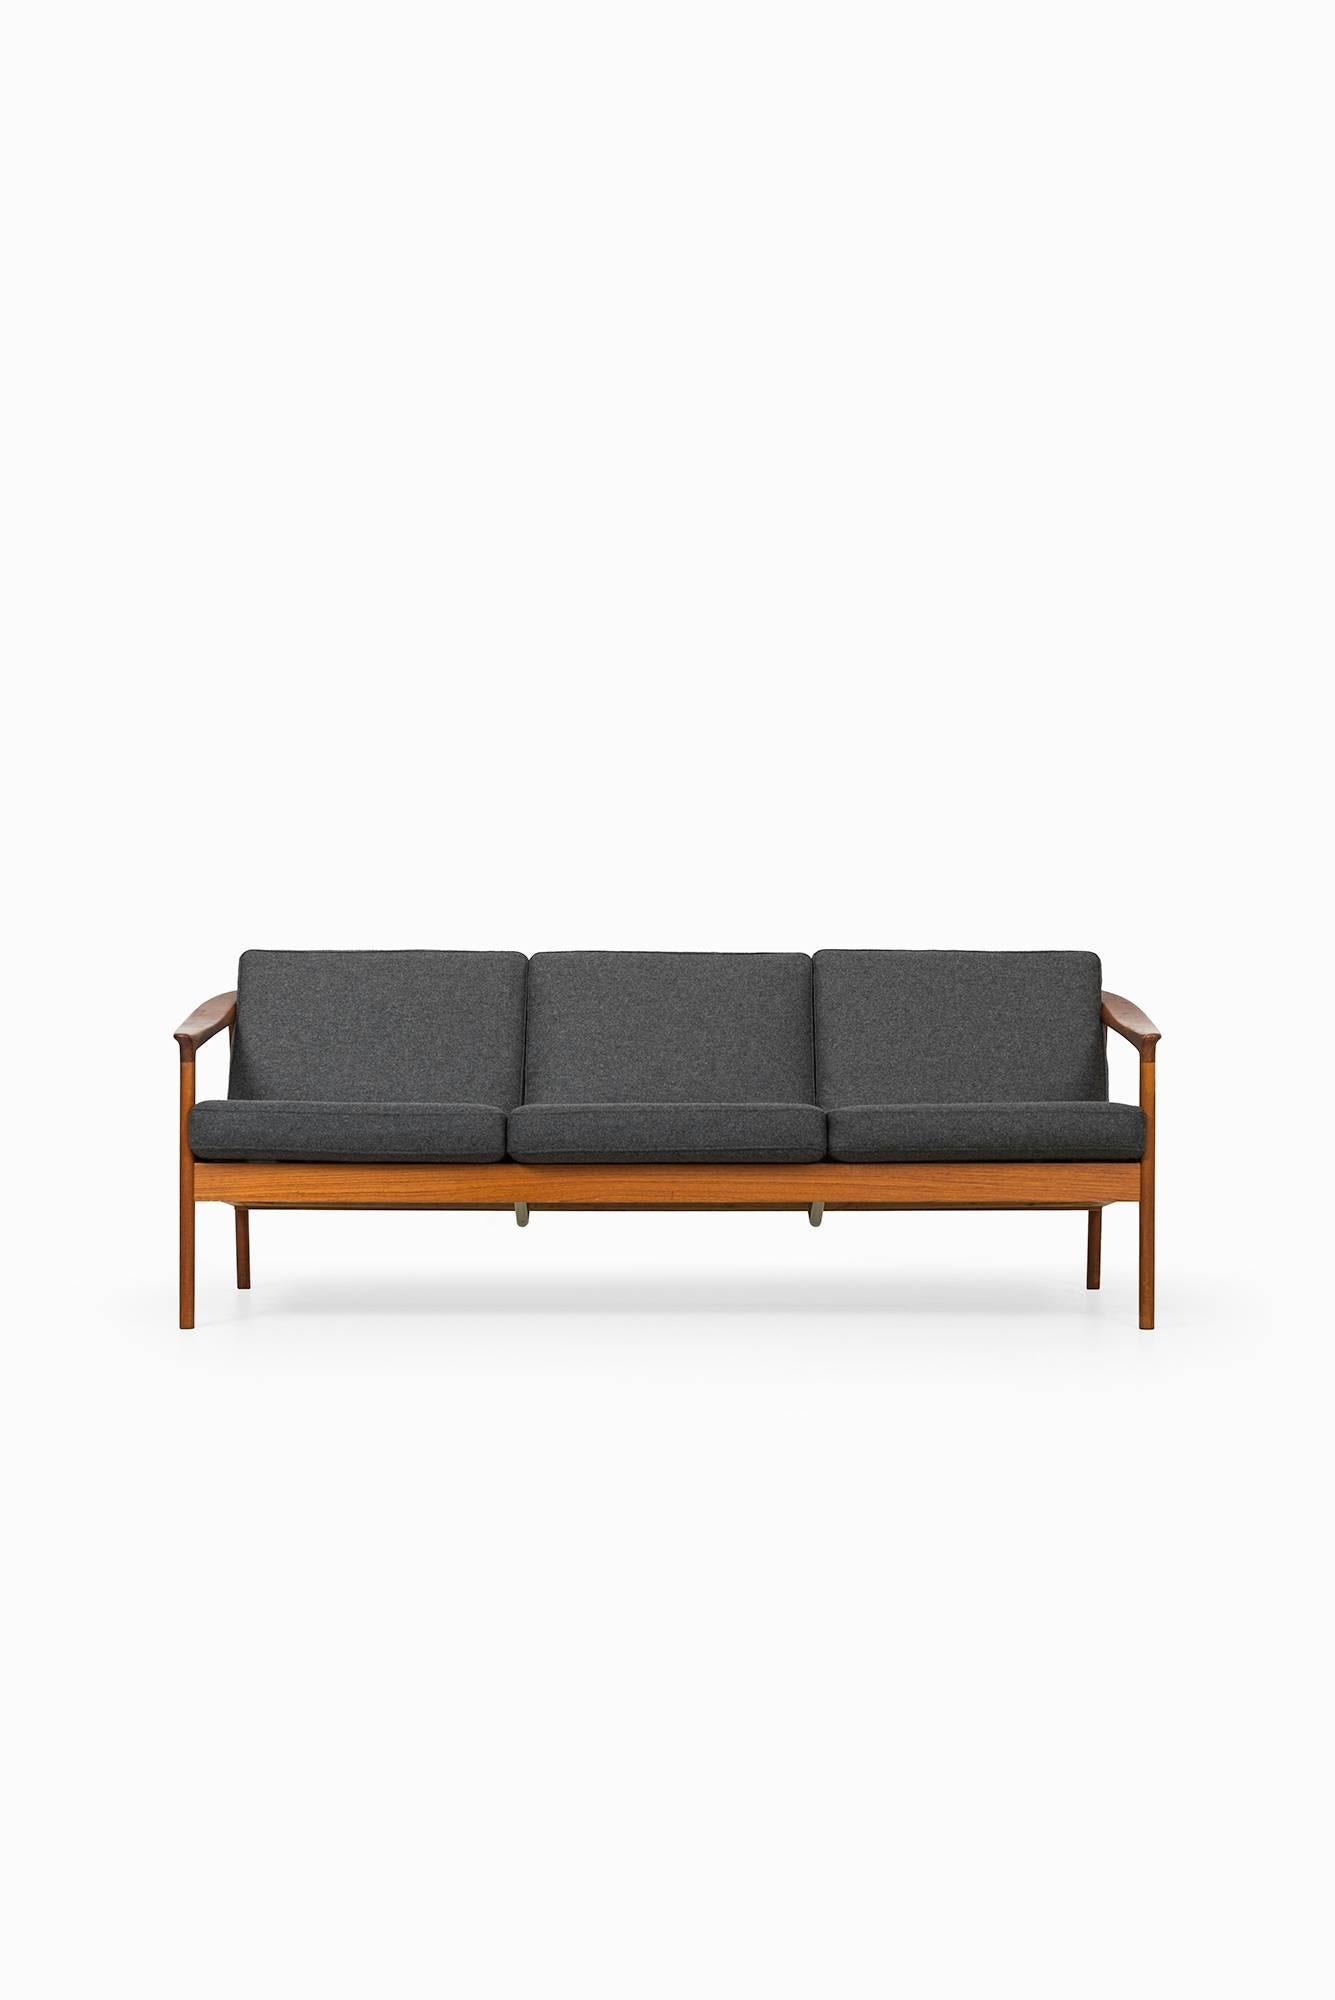 Sofa model Colorado designed by Folke Ohlsson. Produced by Bodafors in Sweden. Matching pair of easy chairs is also available. 